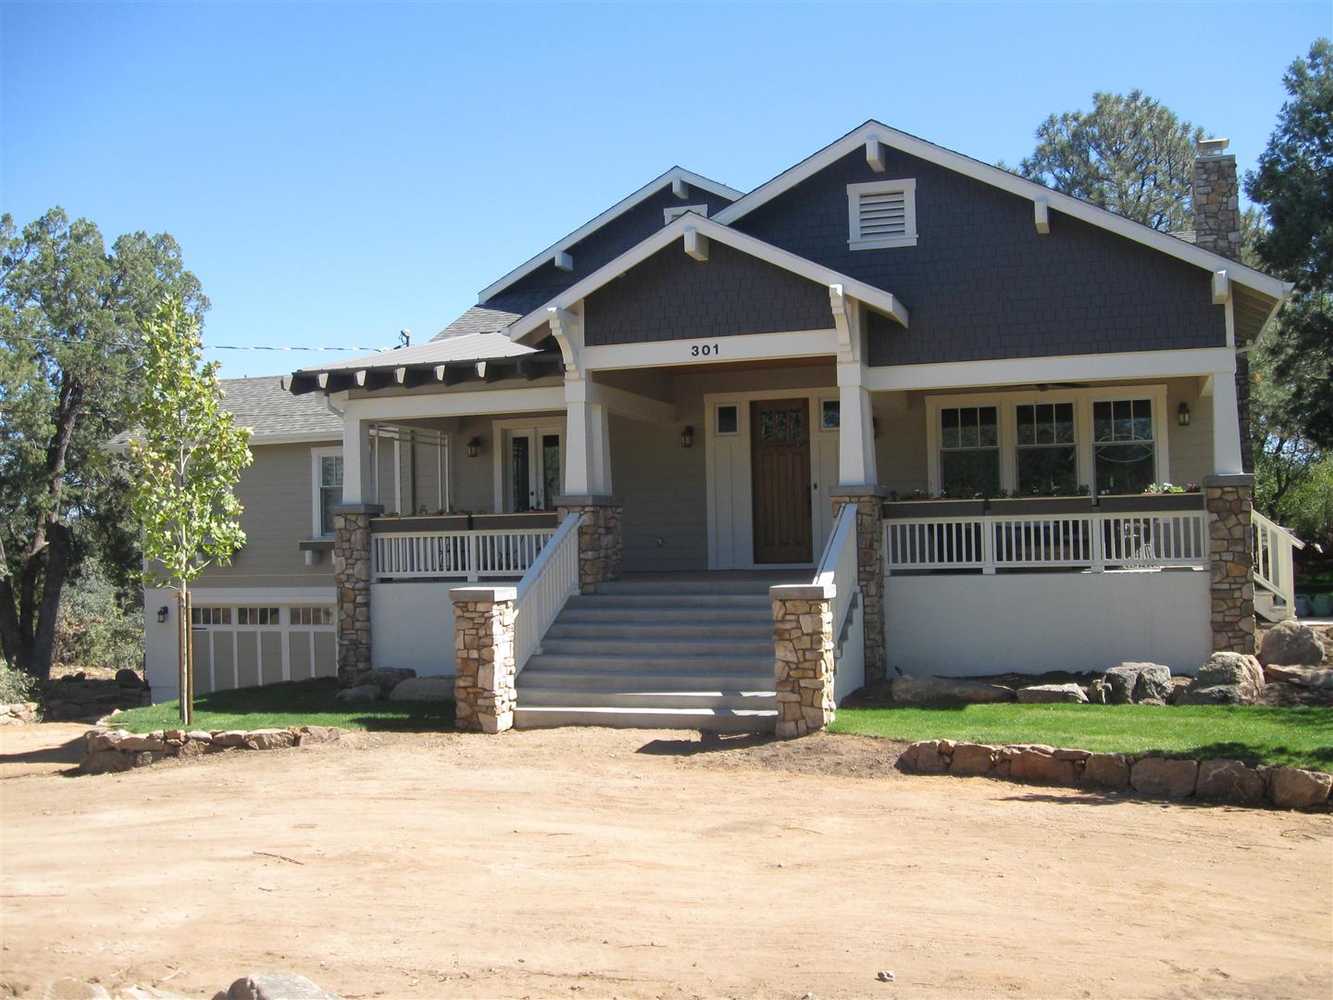 Prescott Area New Home Construction and Remodeling